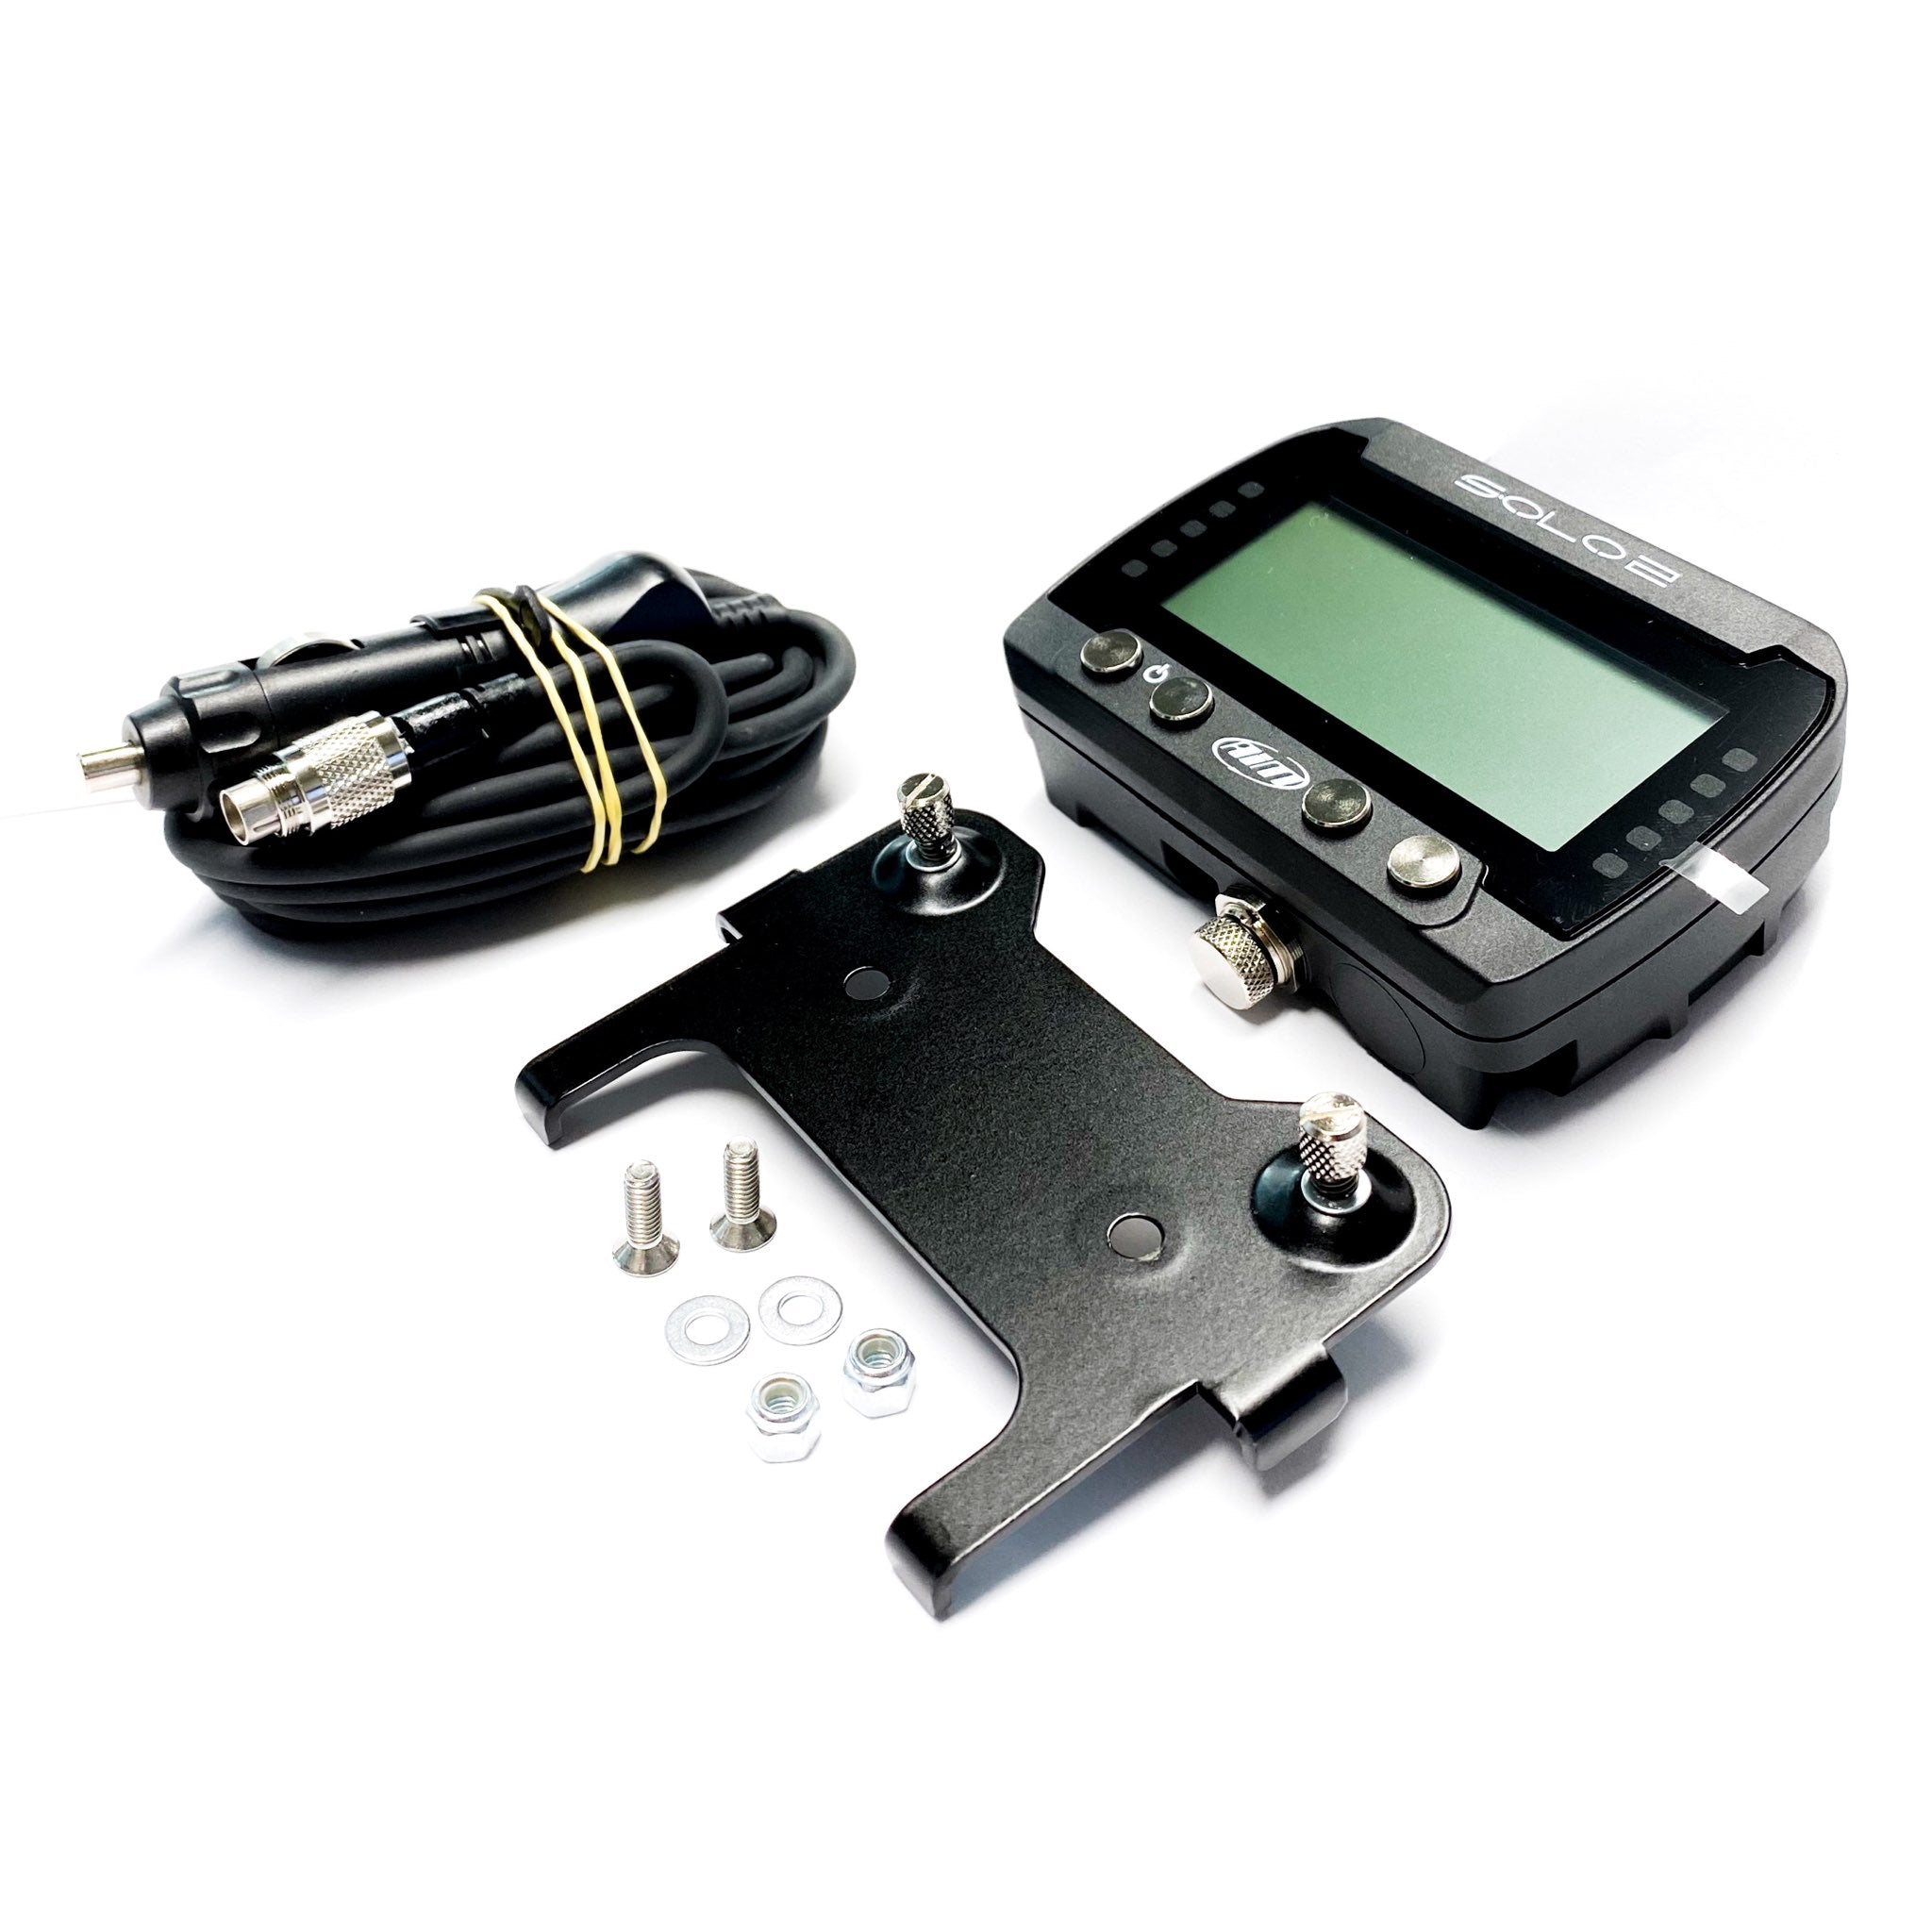 AIM SOLO 2 GPS Lap Timer For Motorsports